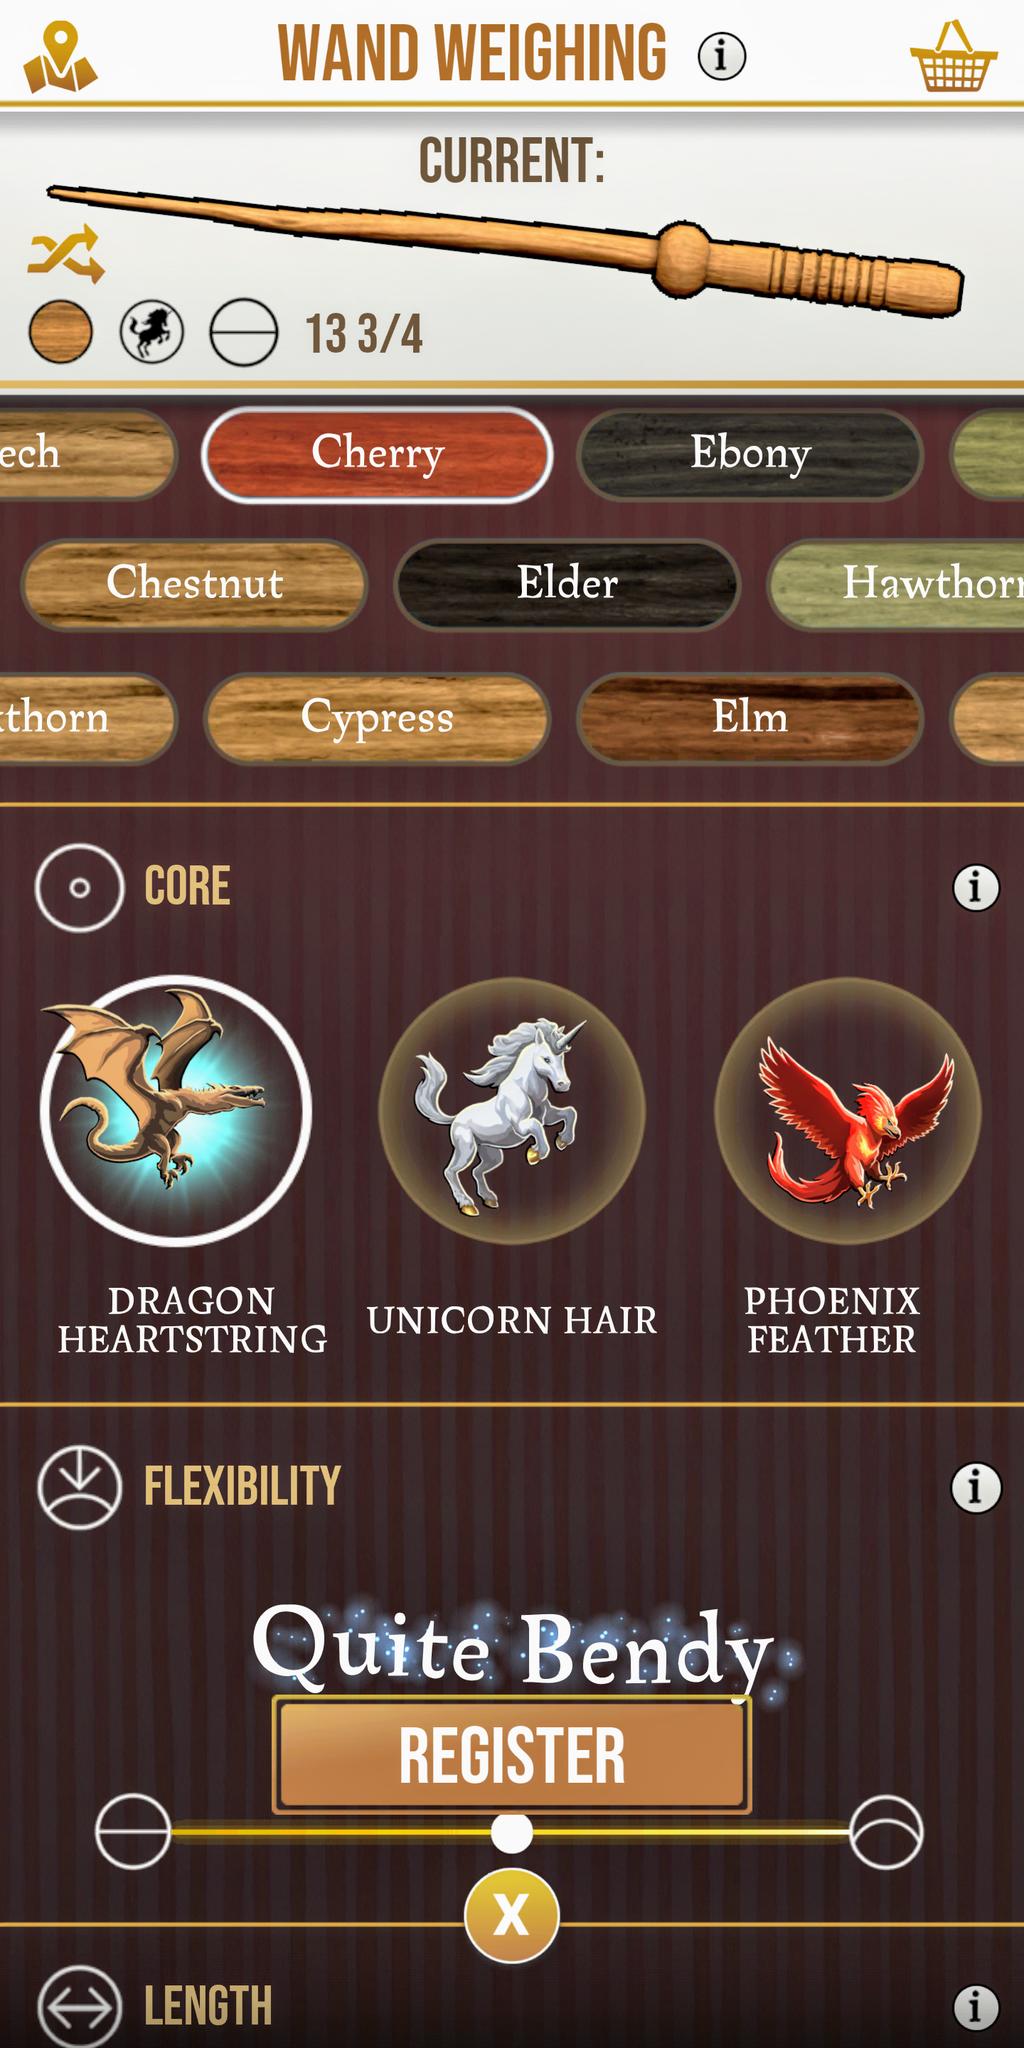 What is the best wand in Pottermore?